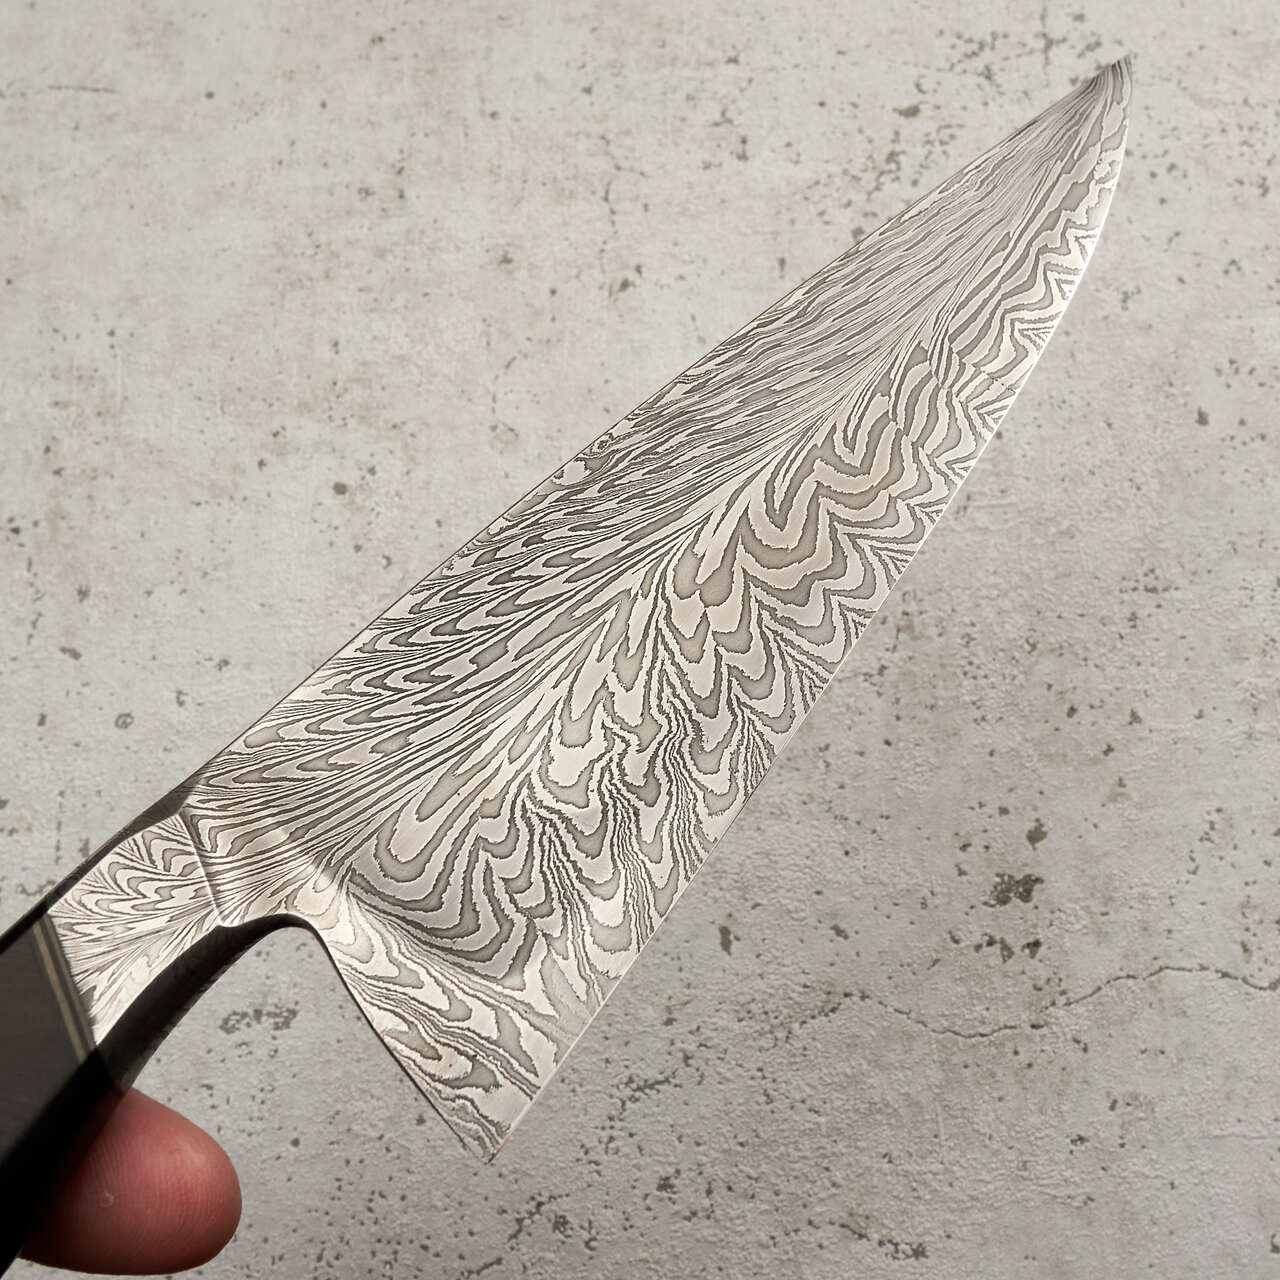 Martin Huber Chef Knife 220mm Feather Damascus "S" Grind with Integral Ironwood Handle - Finish